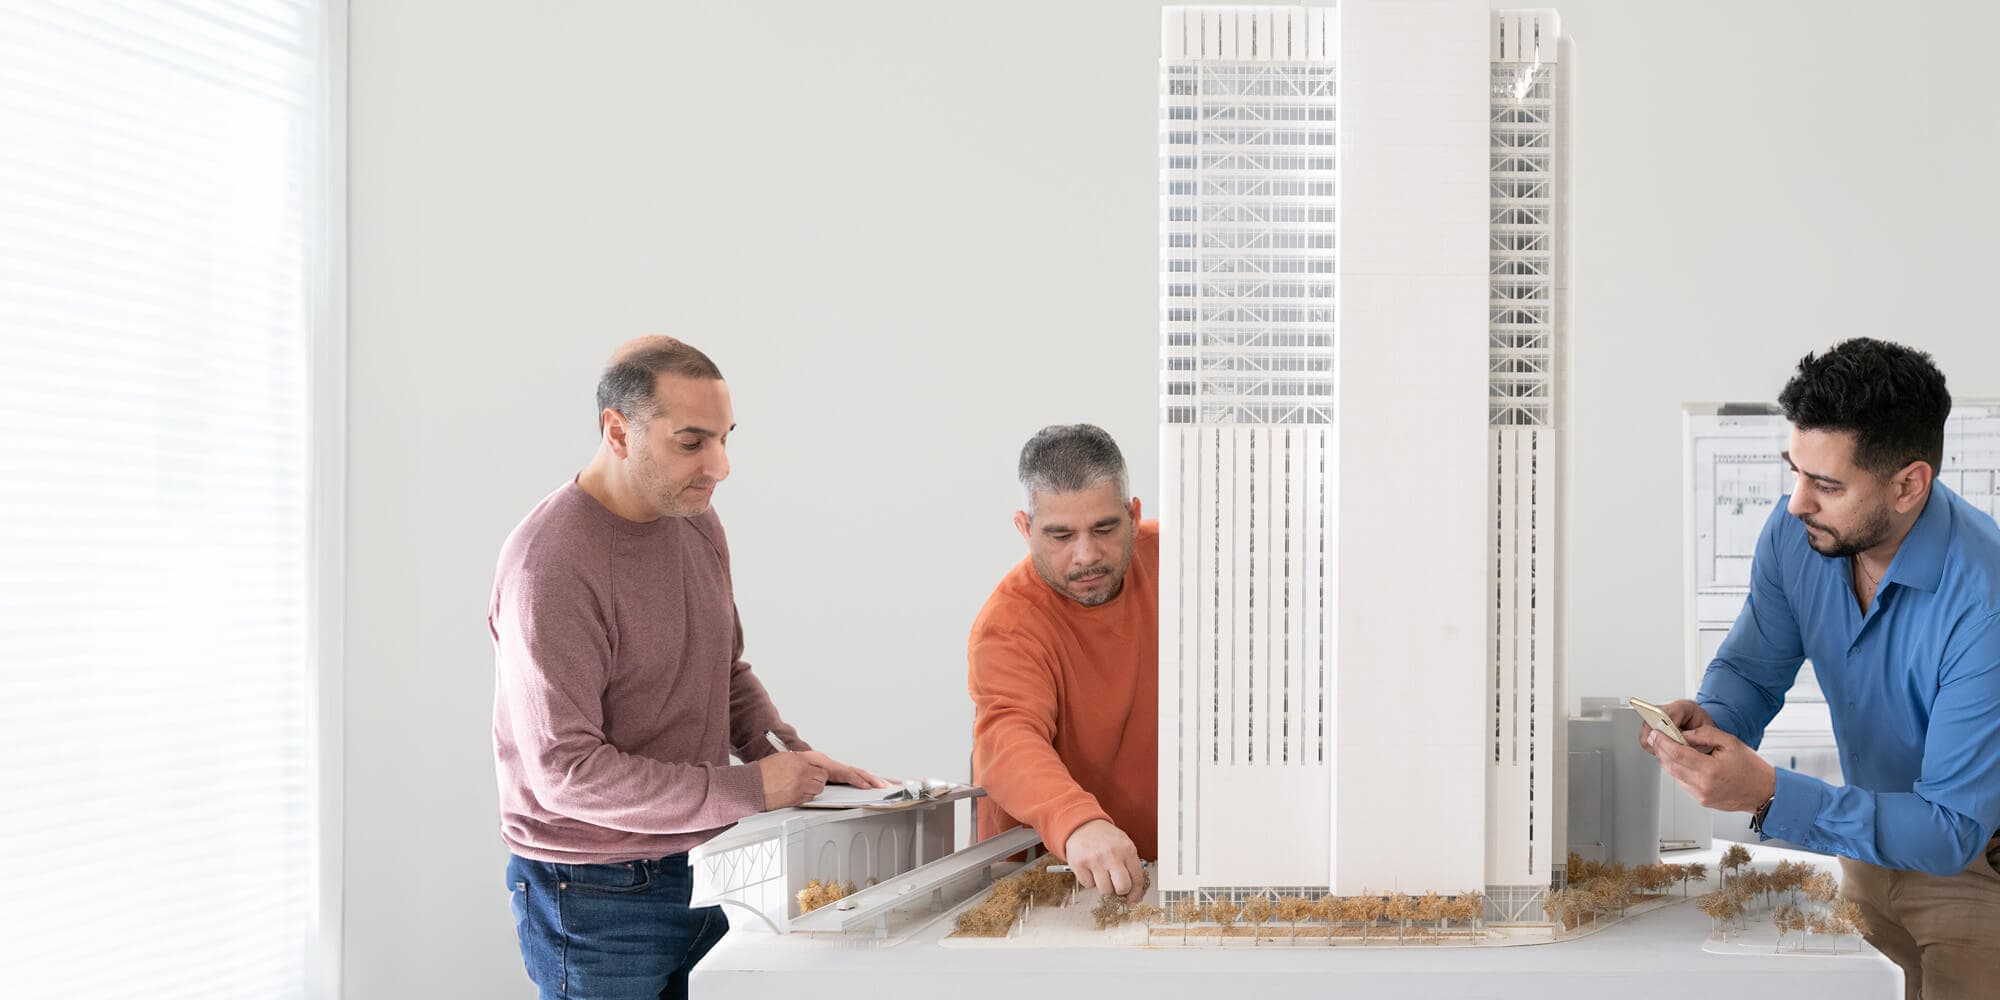 Three business people interacting with a physical model of Sabey's Manhattan Data Center building